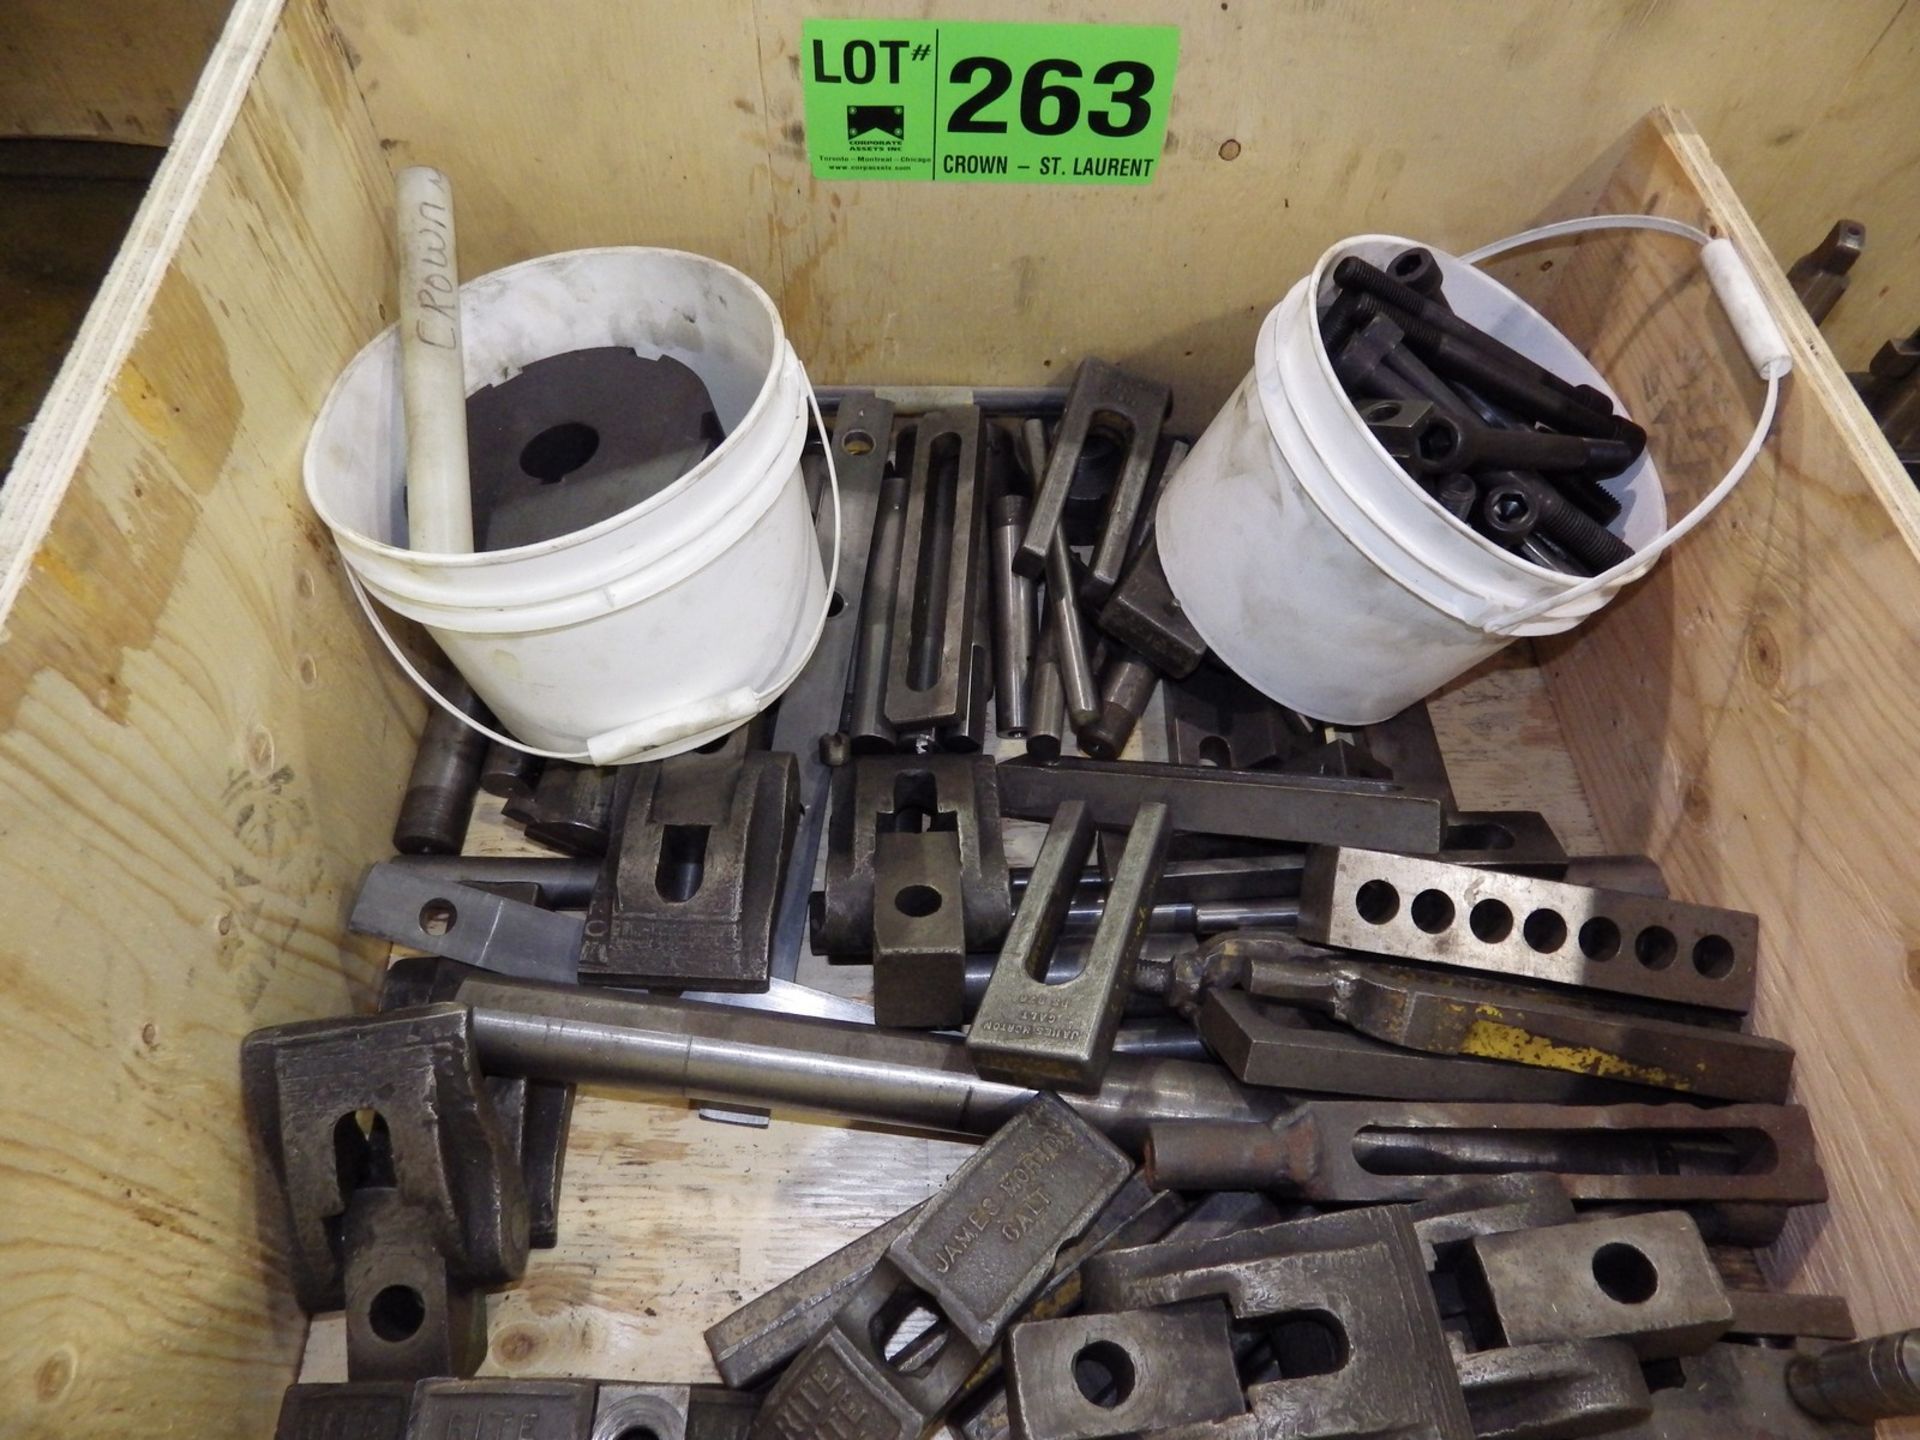 LOT/ TIE-DOWN CLAMPING